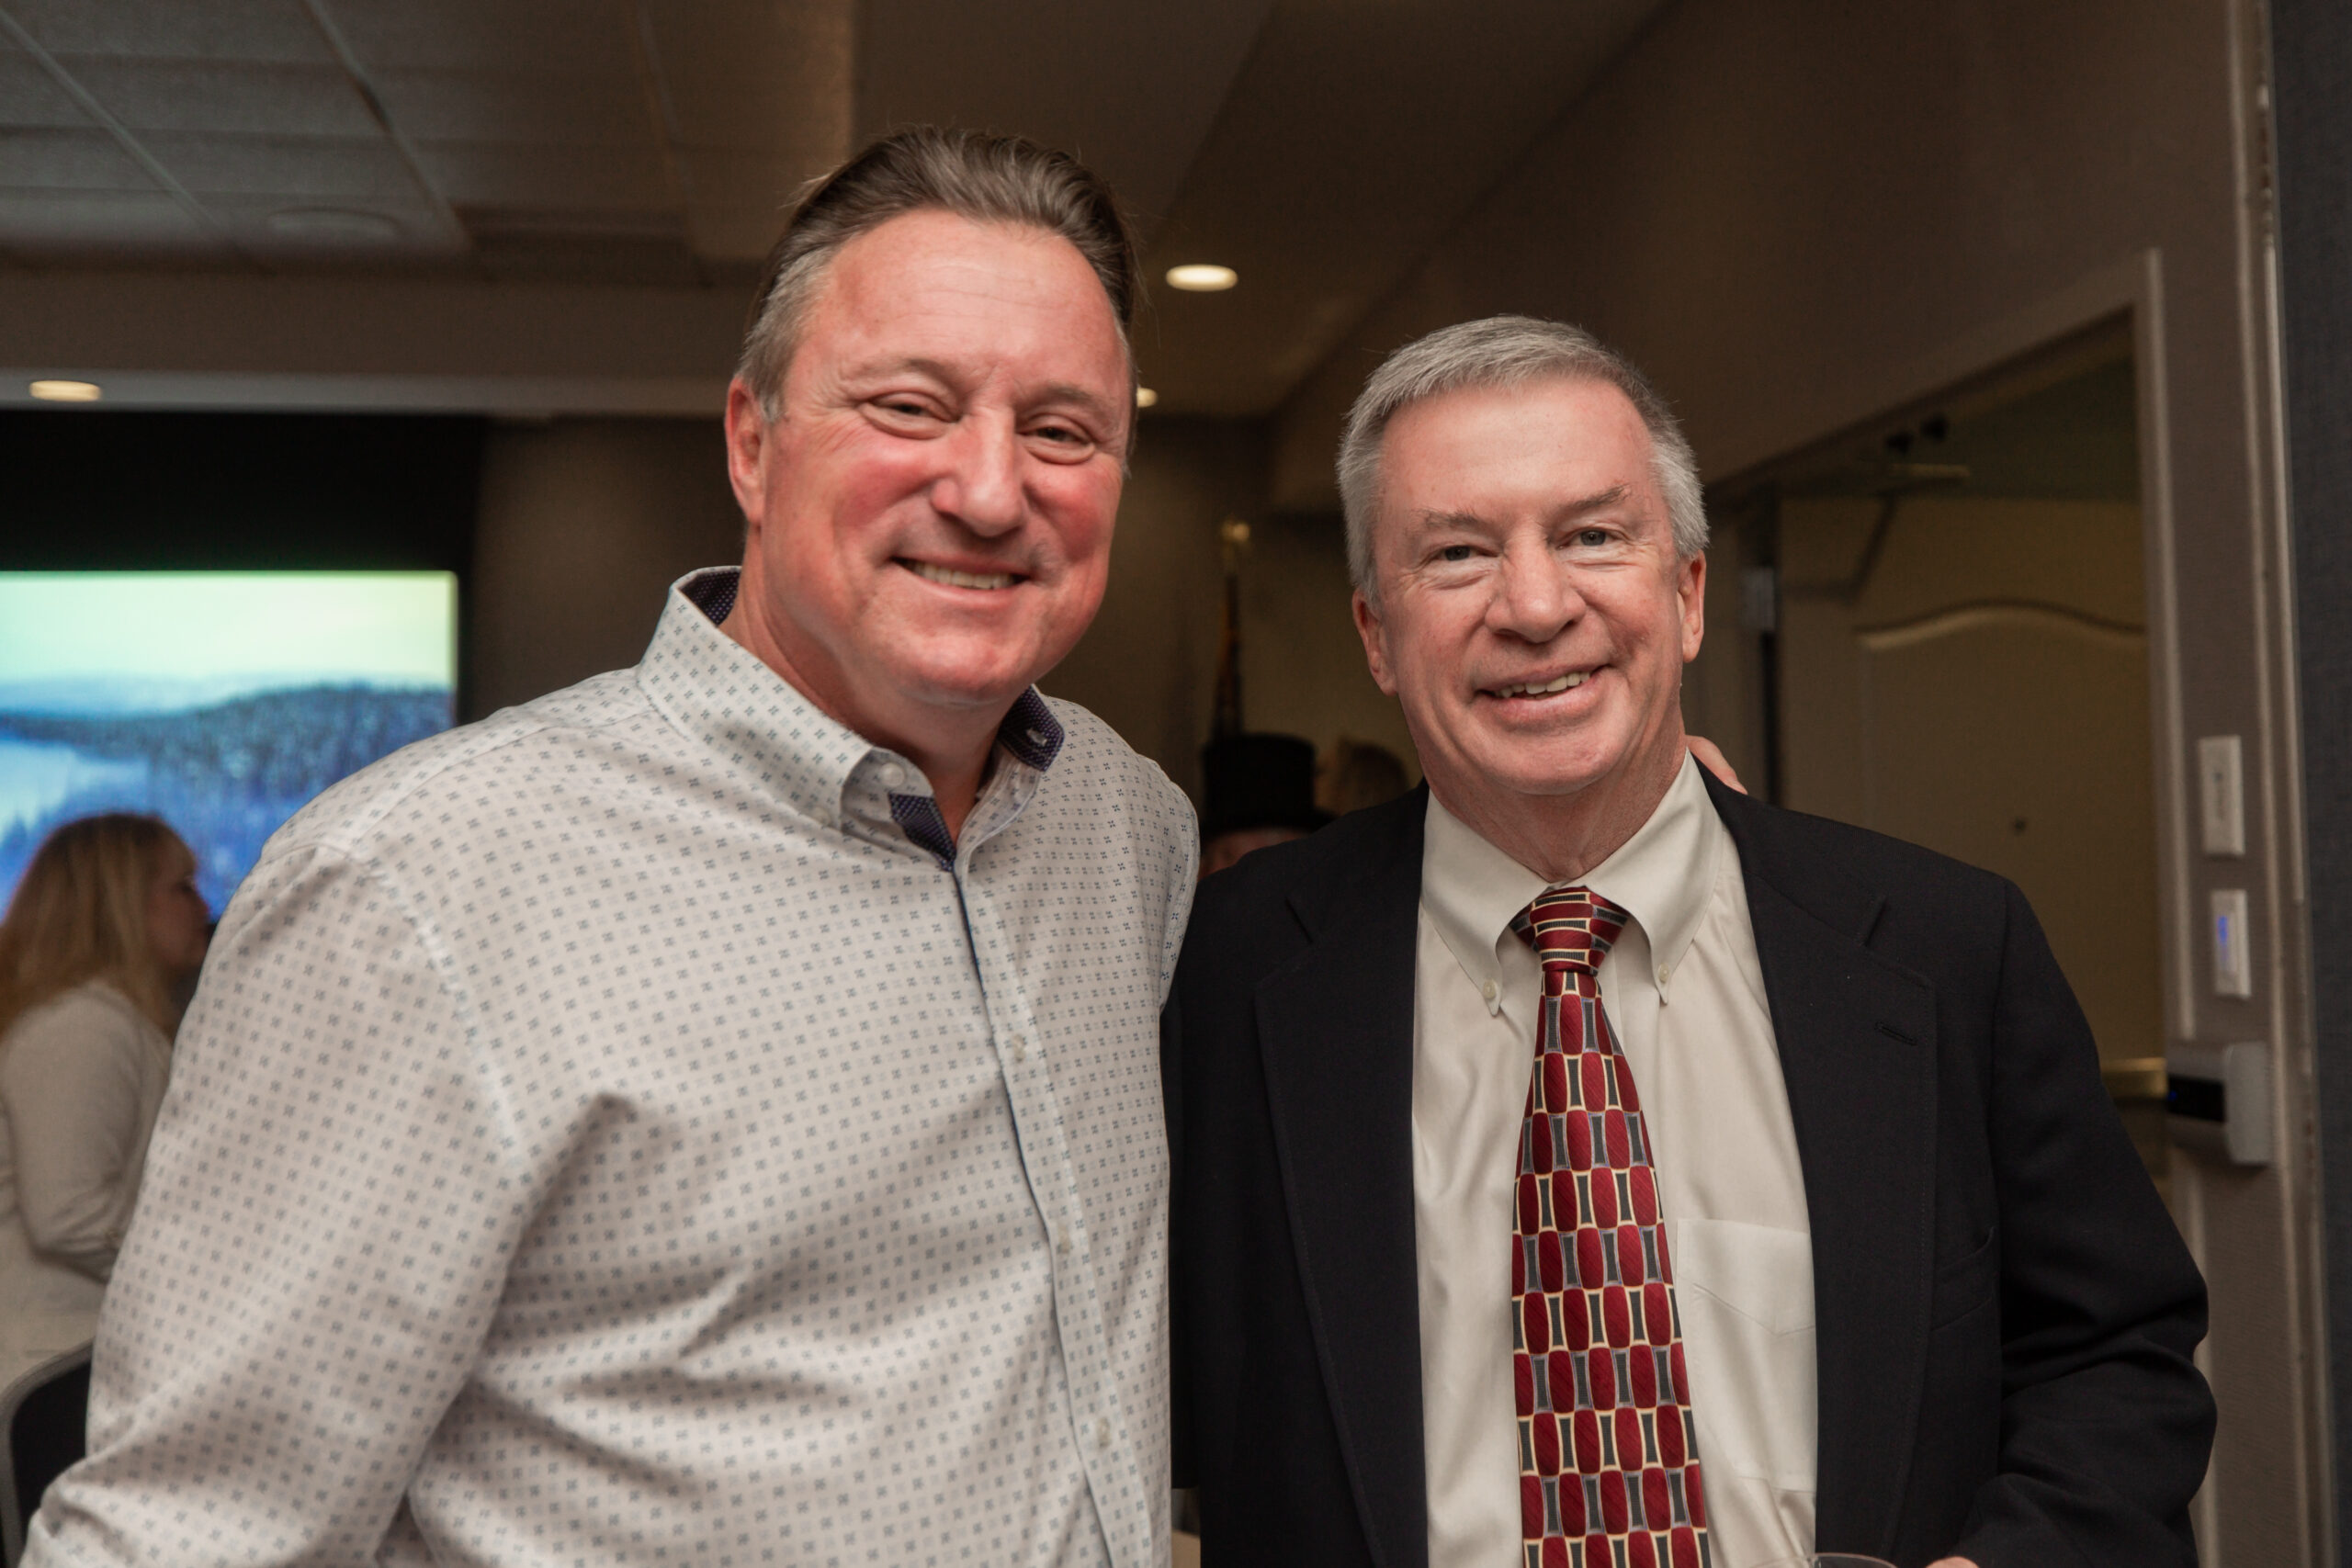 From right to left, Broker-in-Charge Jim Parker and Referral Agent Johnny Bryant